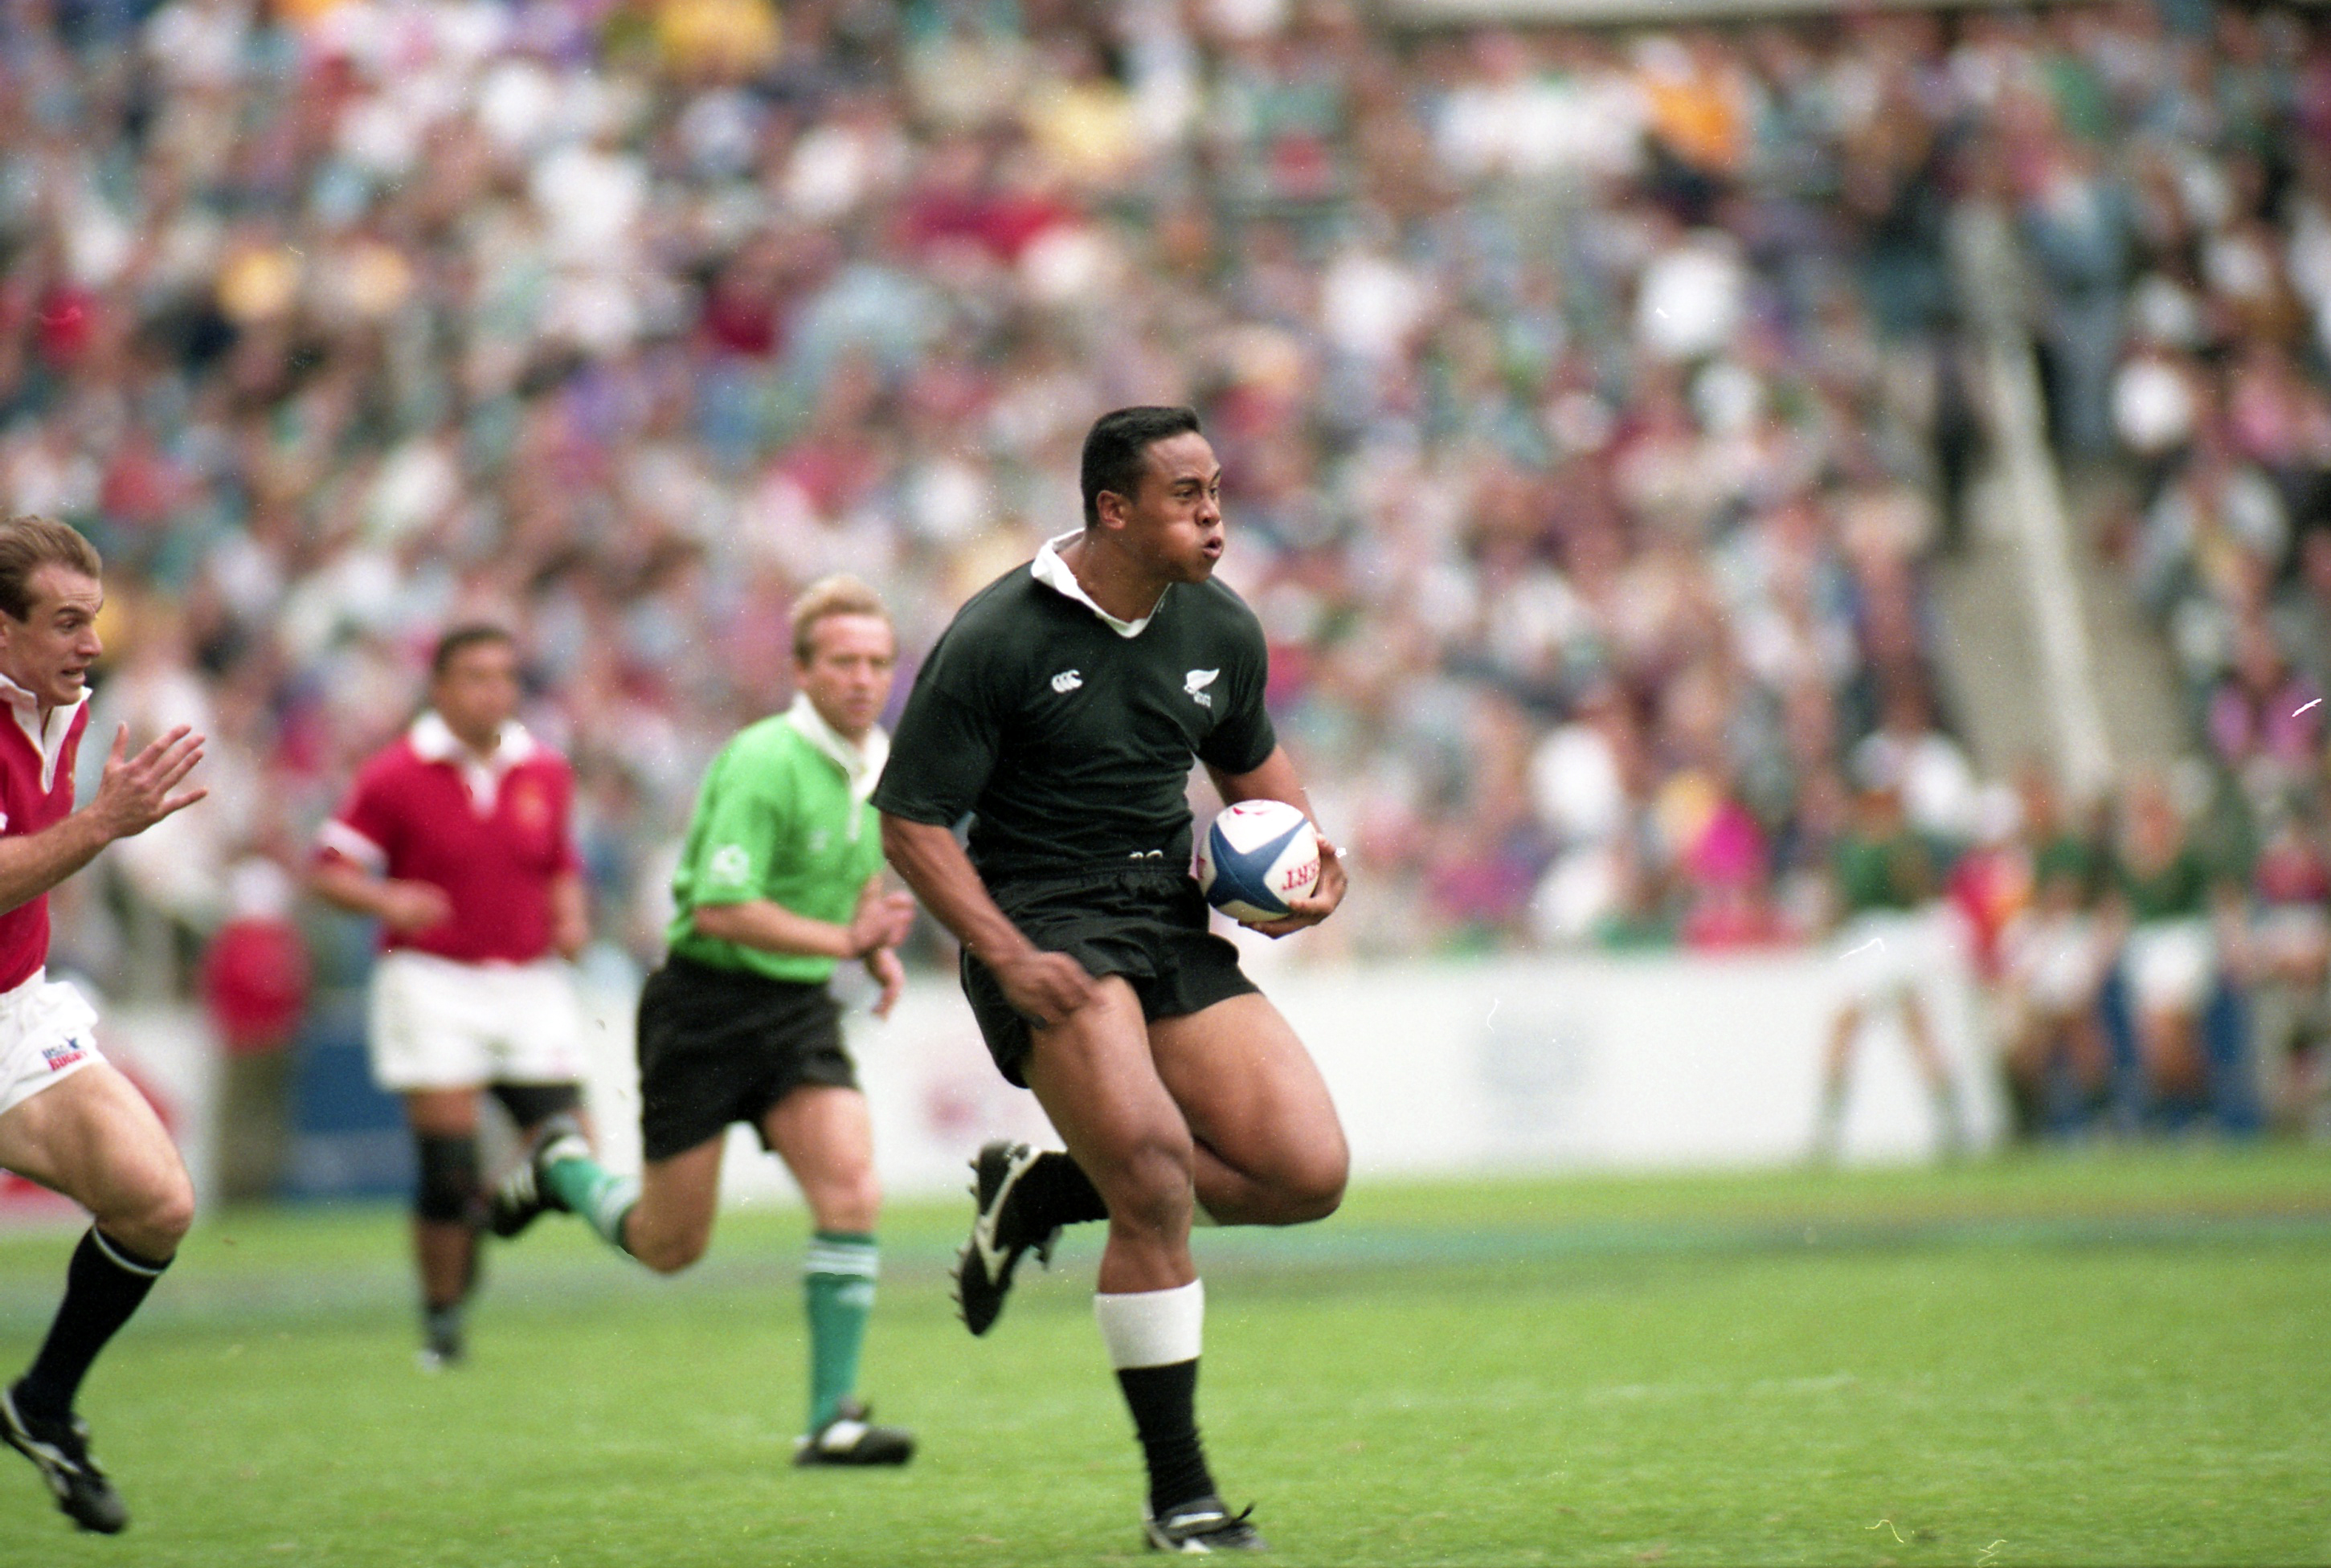 Jonah Lomu in full flight at the Hong Kong Sevens in 1995, the tournament that launched him to international stardom. Photo: Martin Chan/SCMP